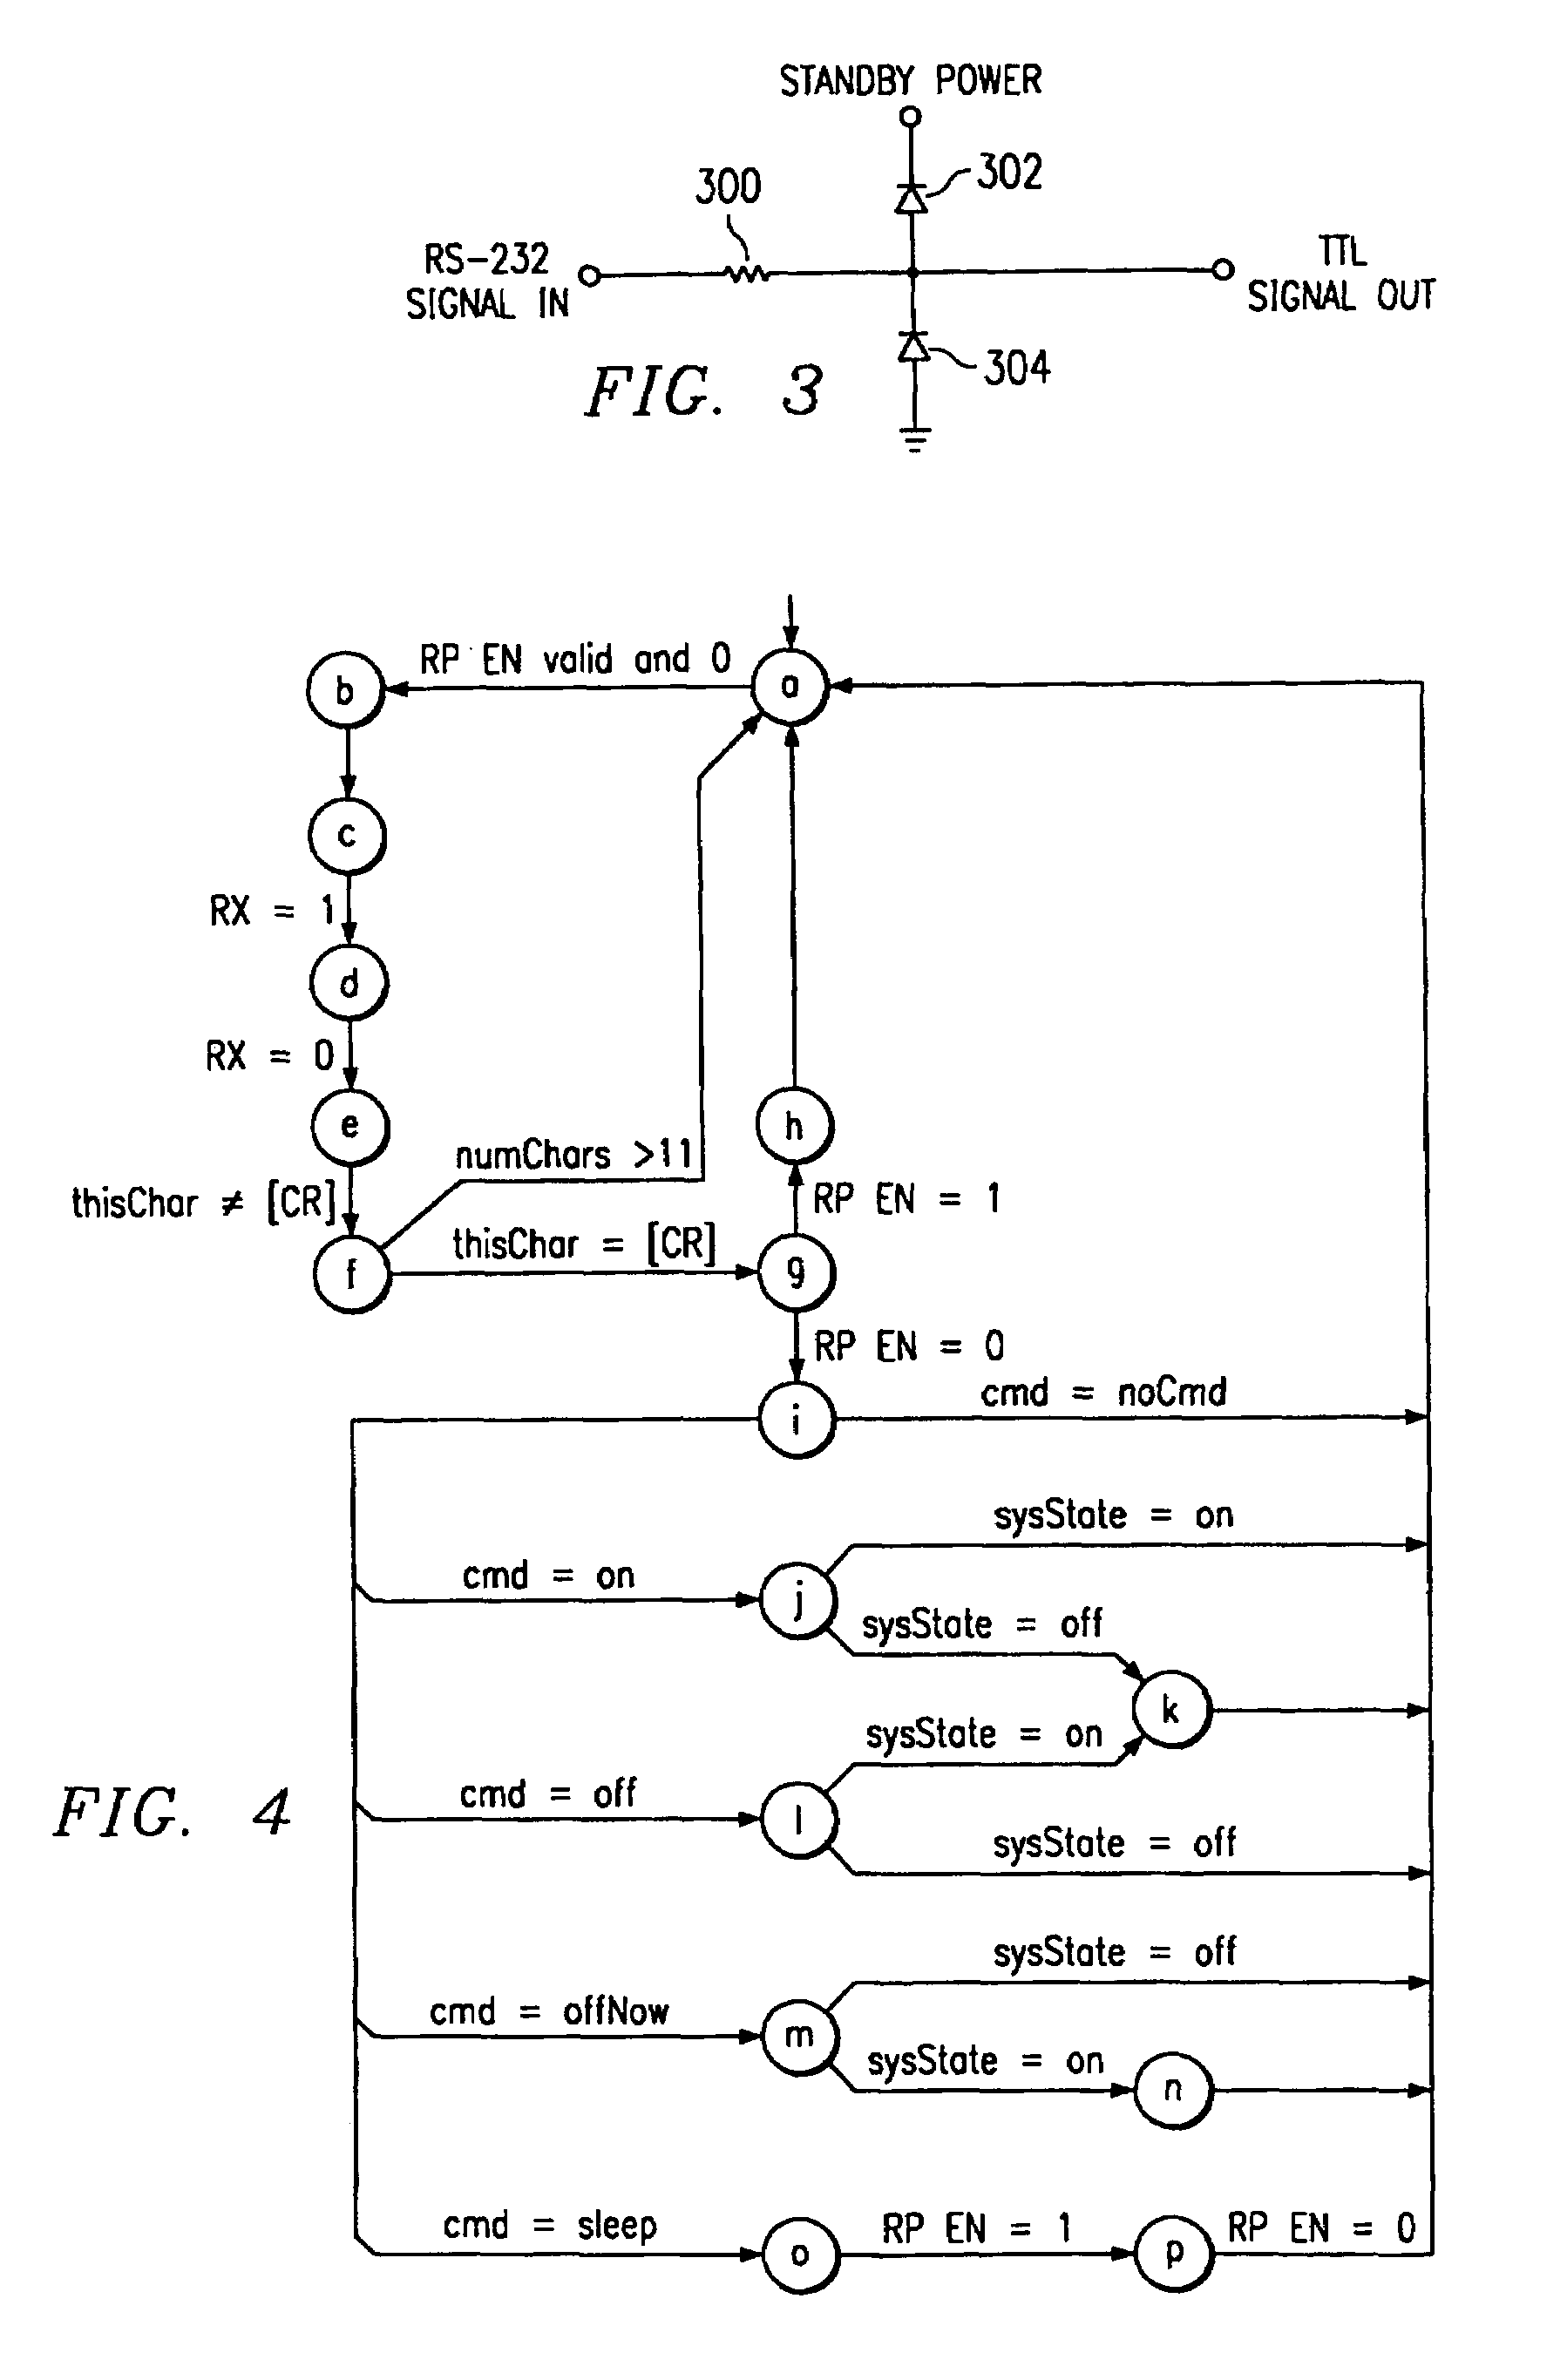 Method and apparatus for secure remote control of power-on state for computers